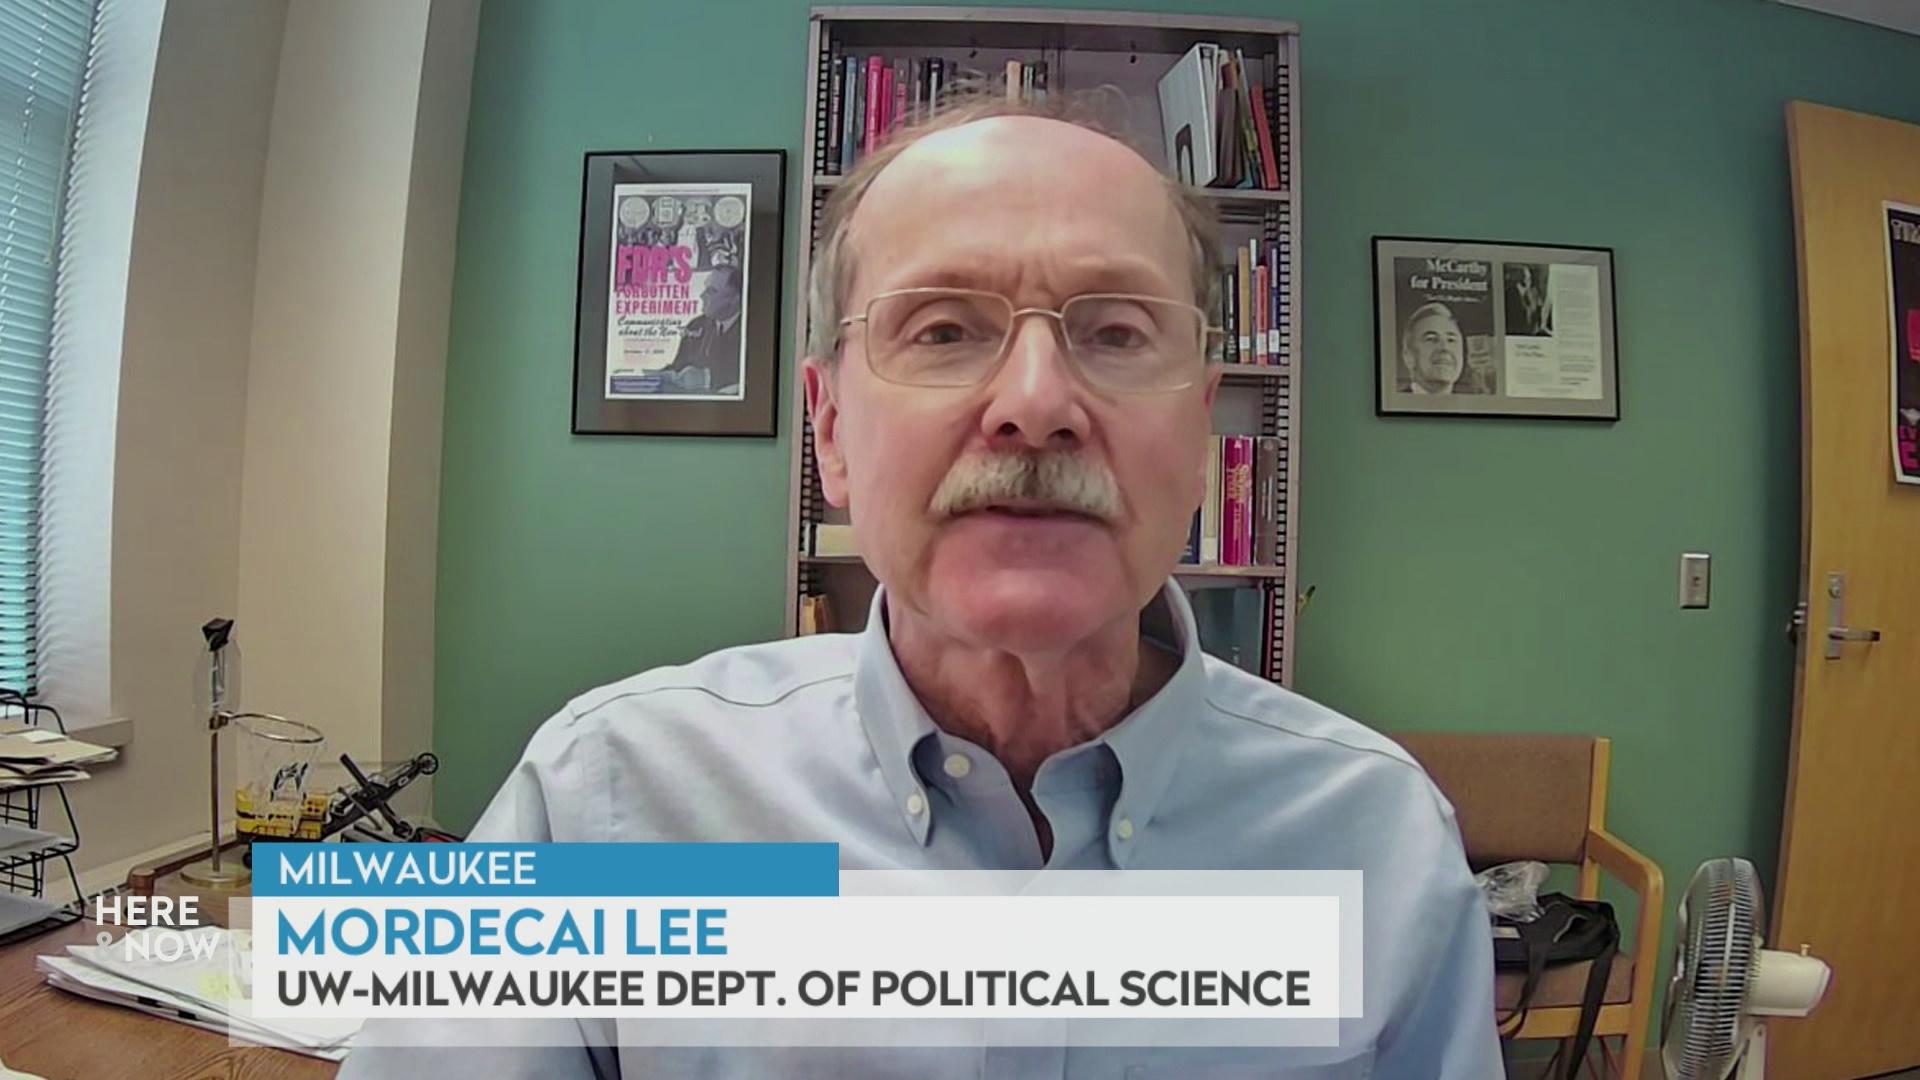 A still image from a video shows Mordecai Lee seated in front of framed art hanging on the wall on either side with a graphic at bottom reading 'Milwaukee,' 'Mordecai Lee' and 'UW-Milwaukee Dept. of Political Science.'